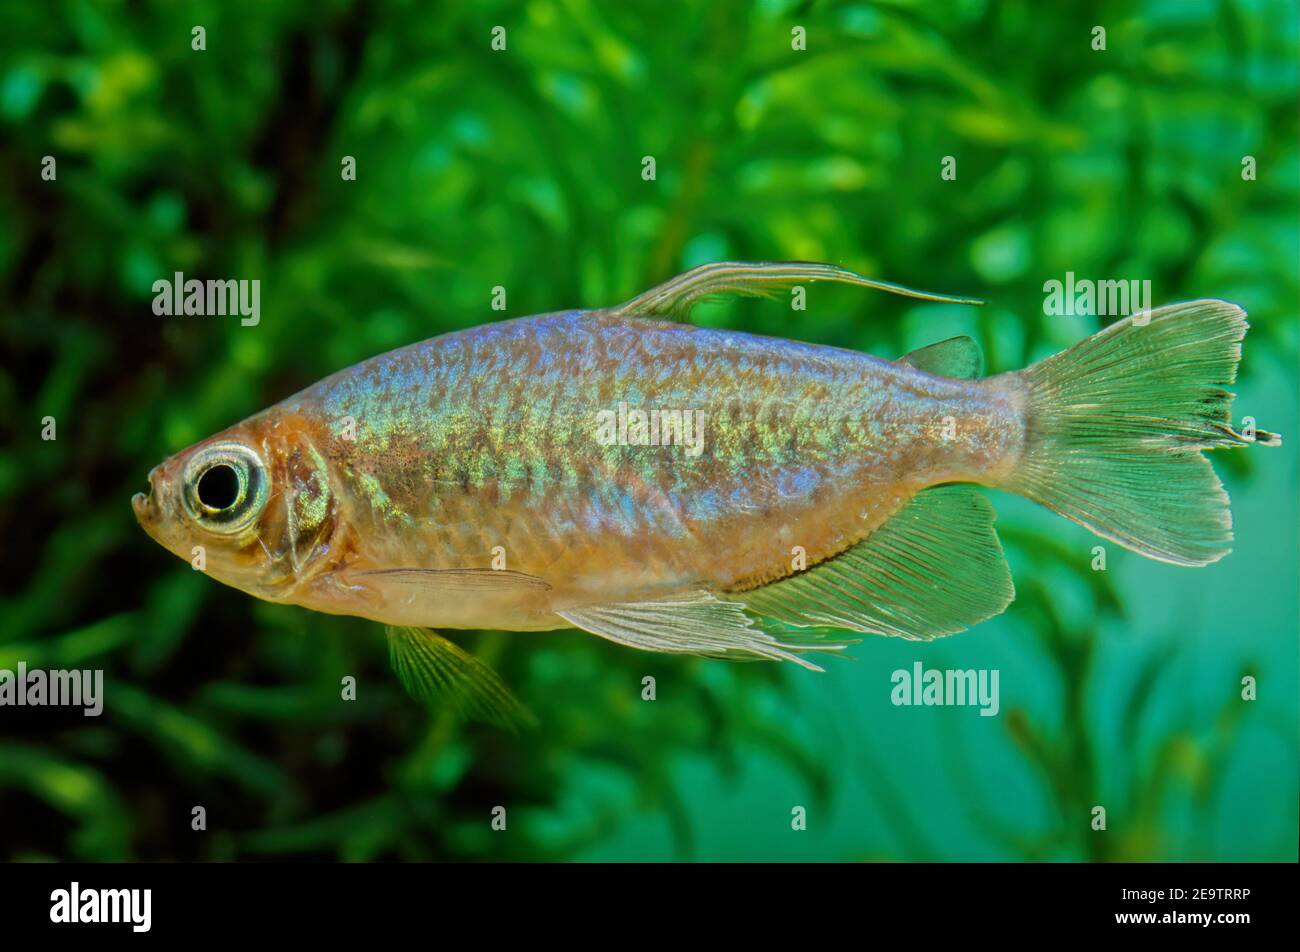 The Congo tetra (Phenacogrammus interruptus) is a species of fish in the African tetra family, found in the central Congo River Basin in Africa. Stock Photo